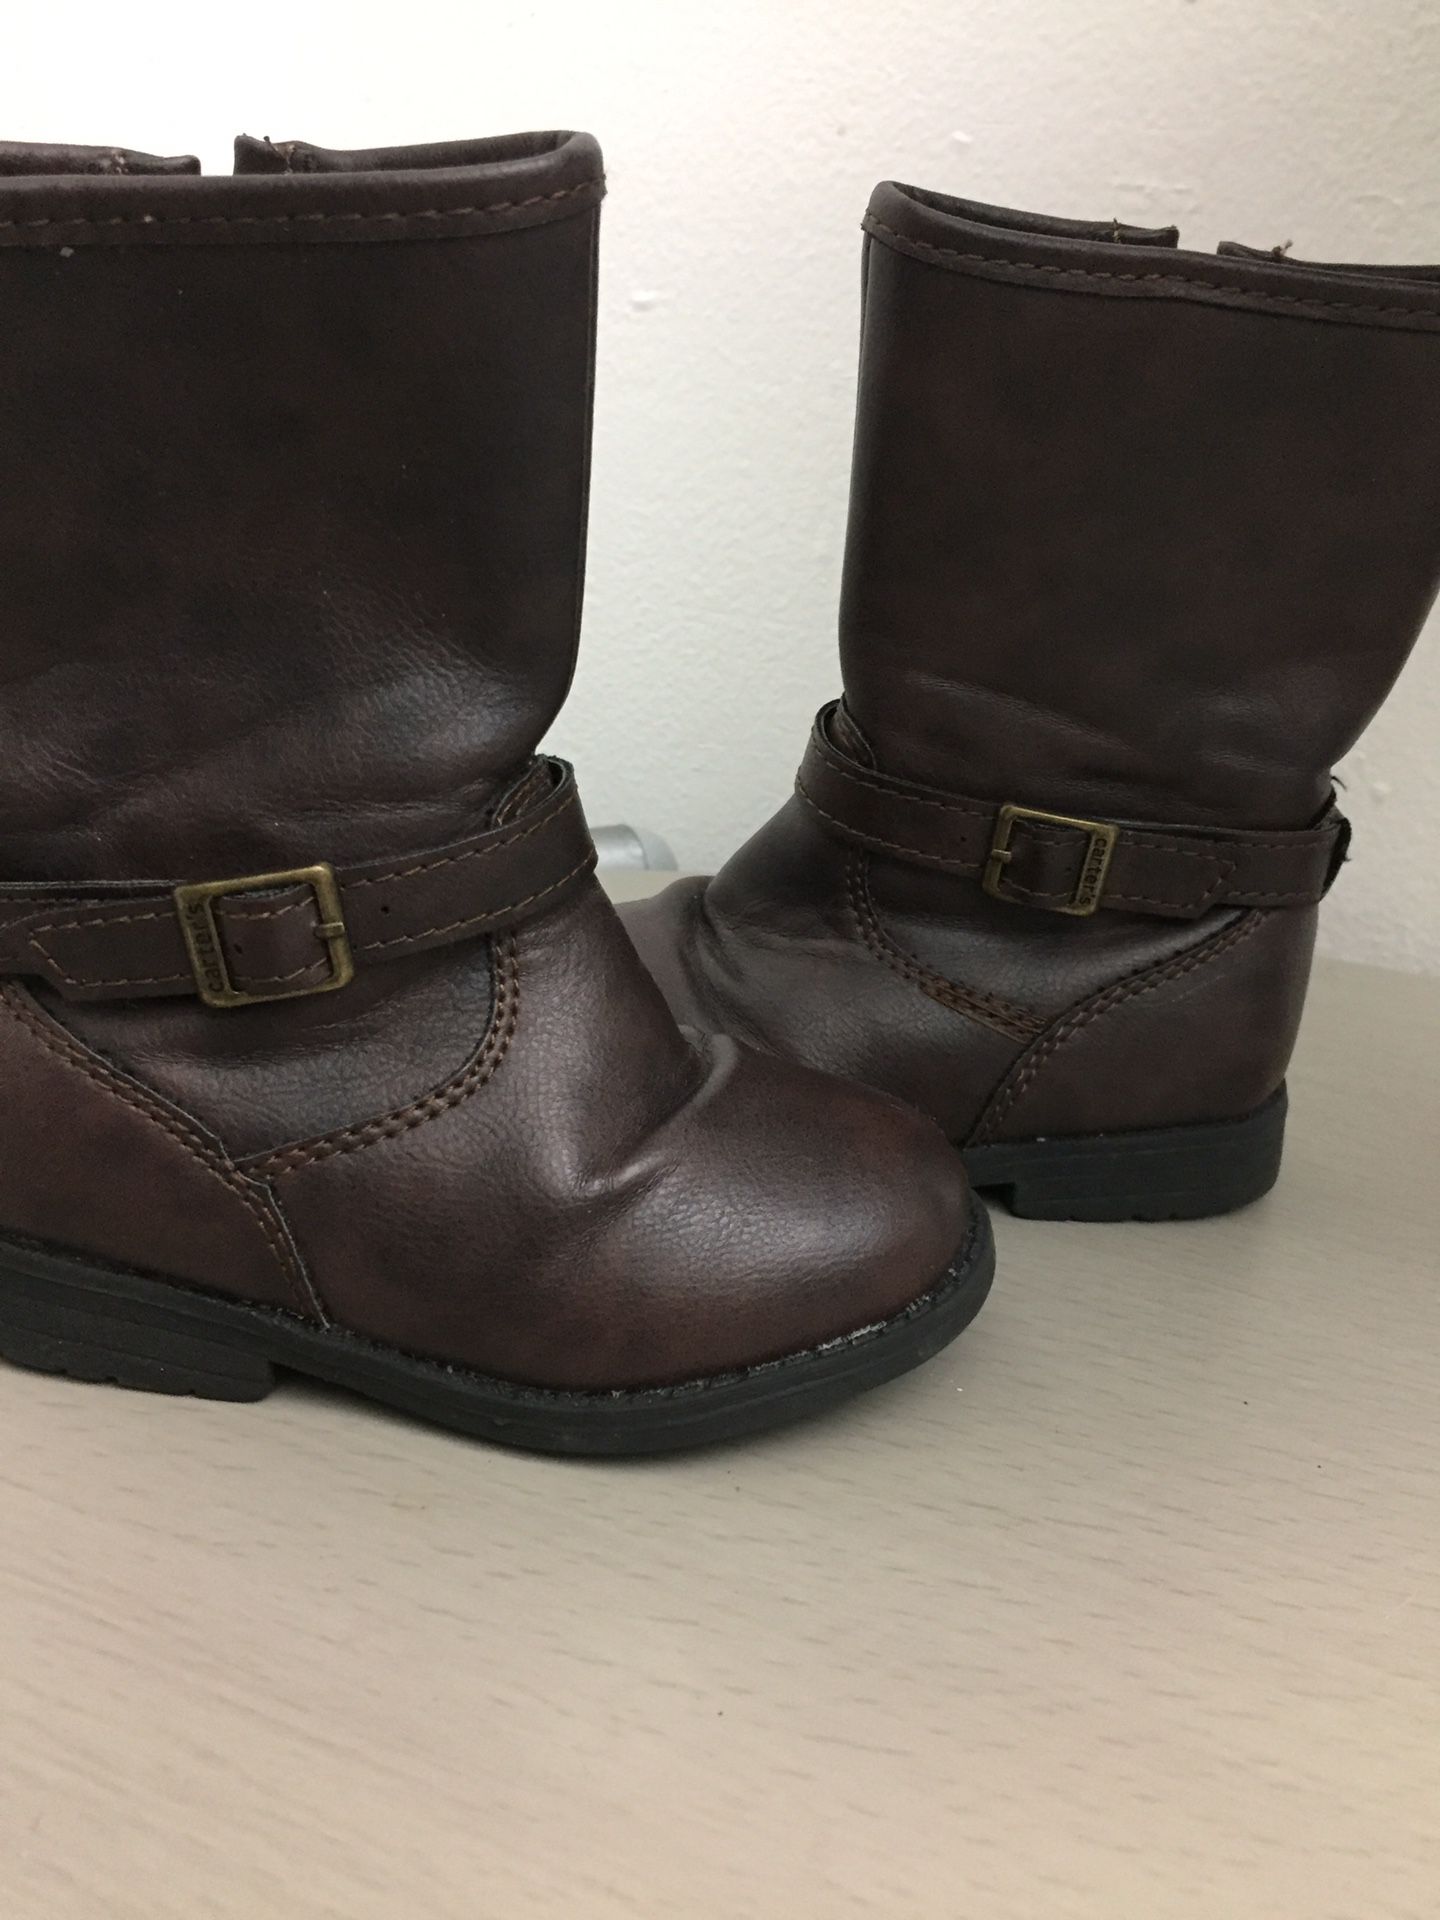 Carter’s toddler girl boots size 5